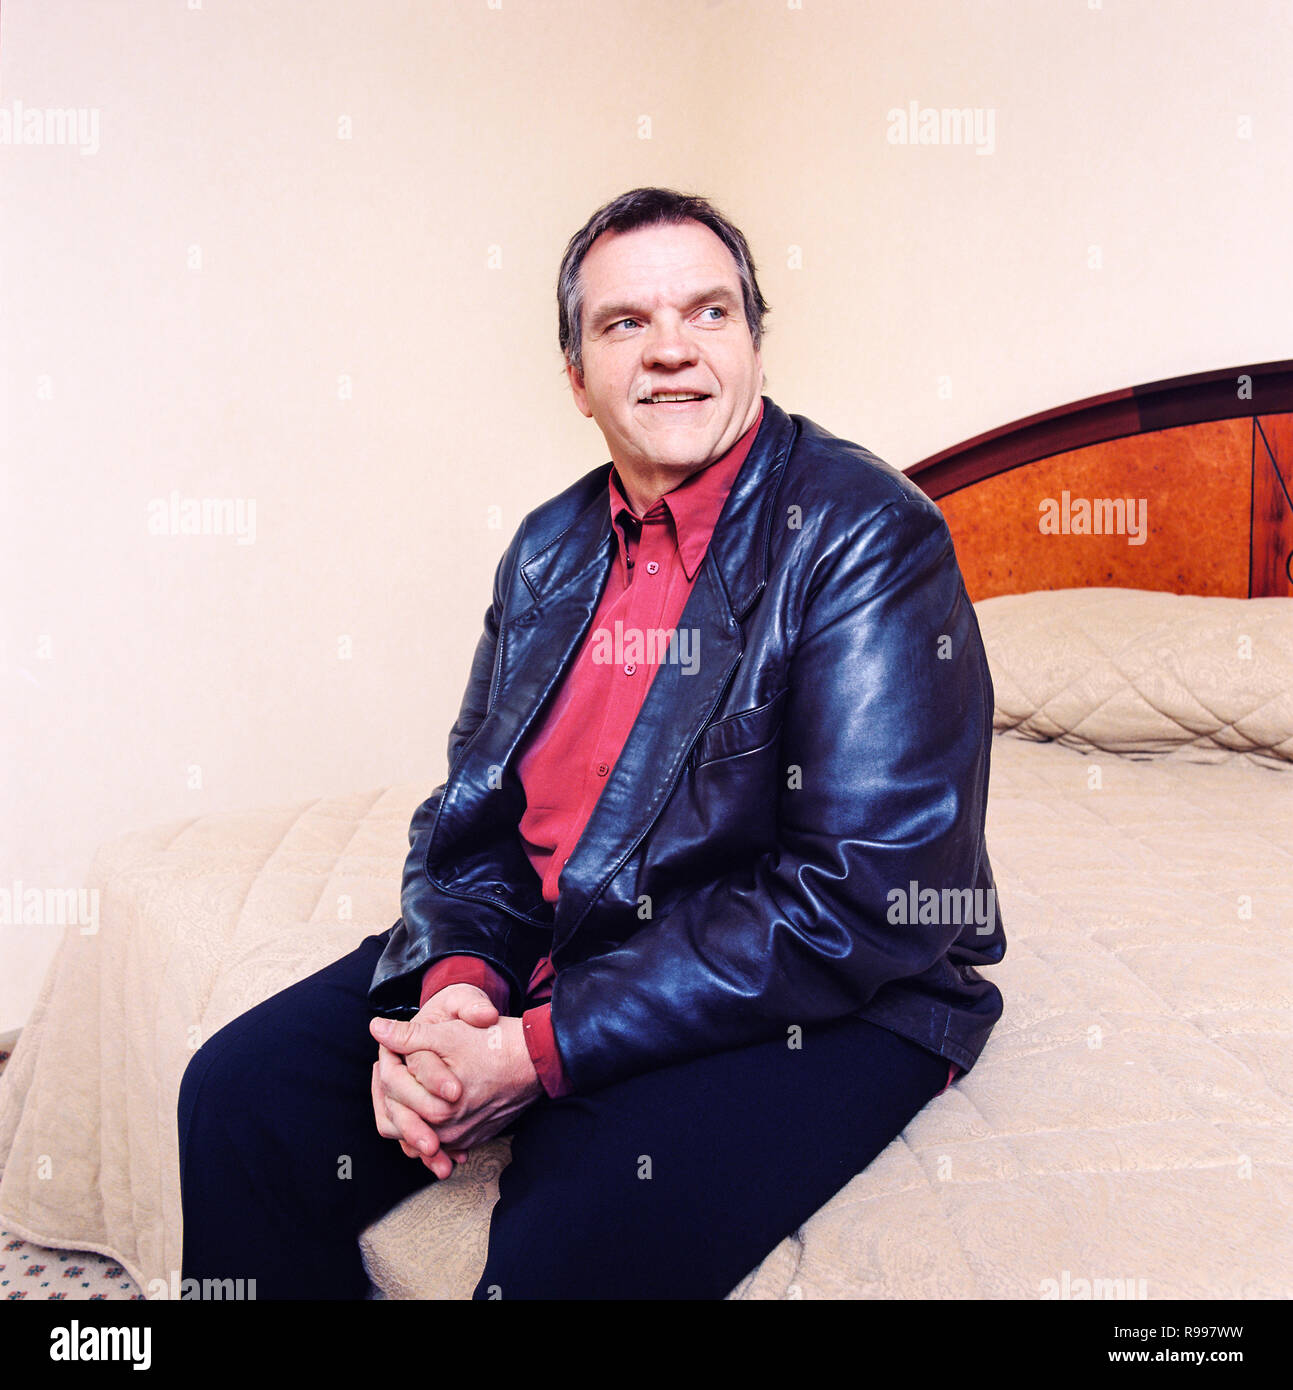 Meat Loaf,American singer, songwriter, record producer, and actor, Photographed in Kesington, London, England, United Kingdom. Stock Photo